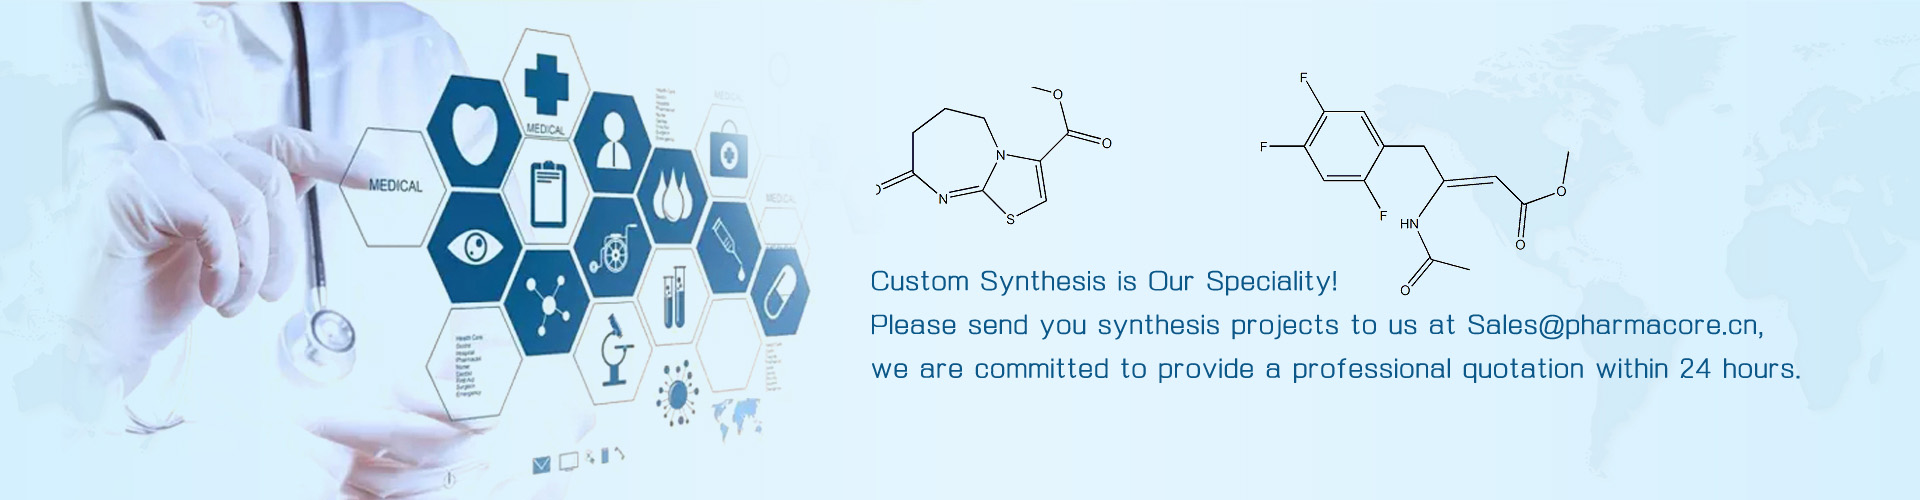 Custom Synthesis banner